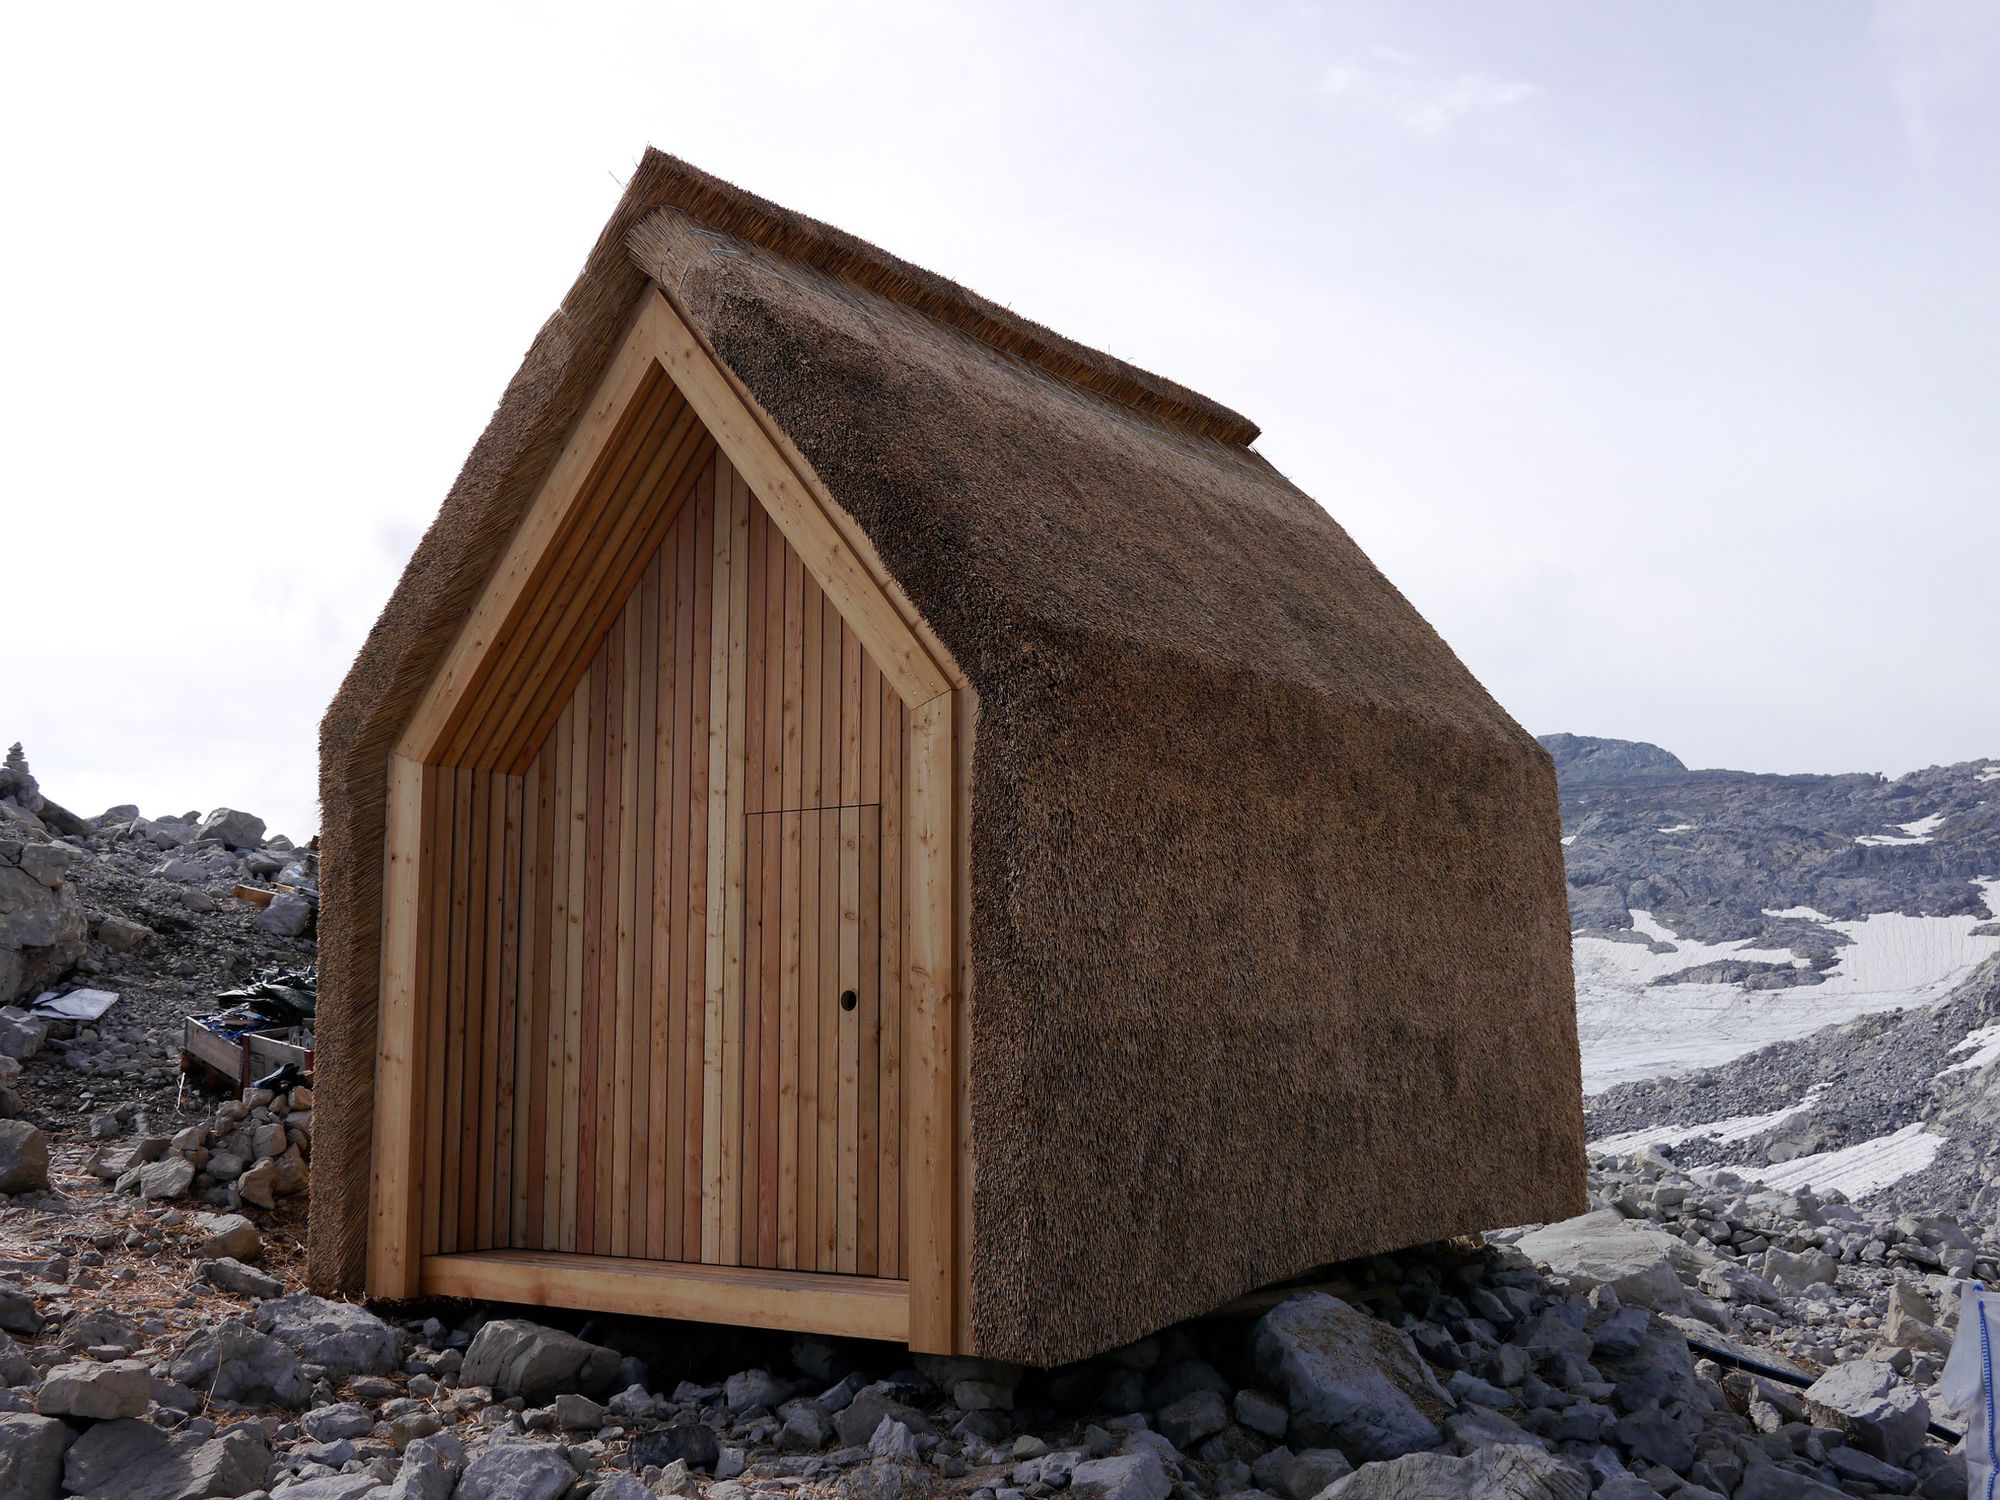 Alpine hut with a thatched roof